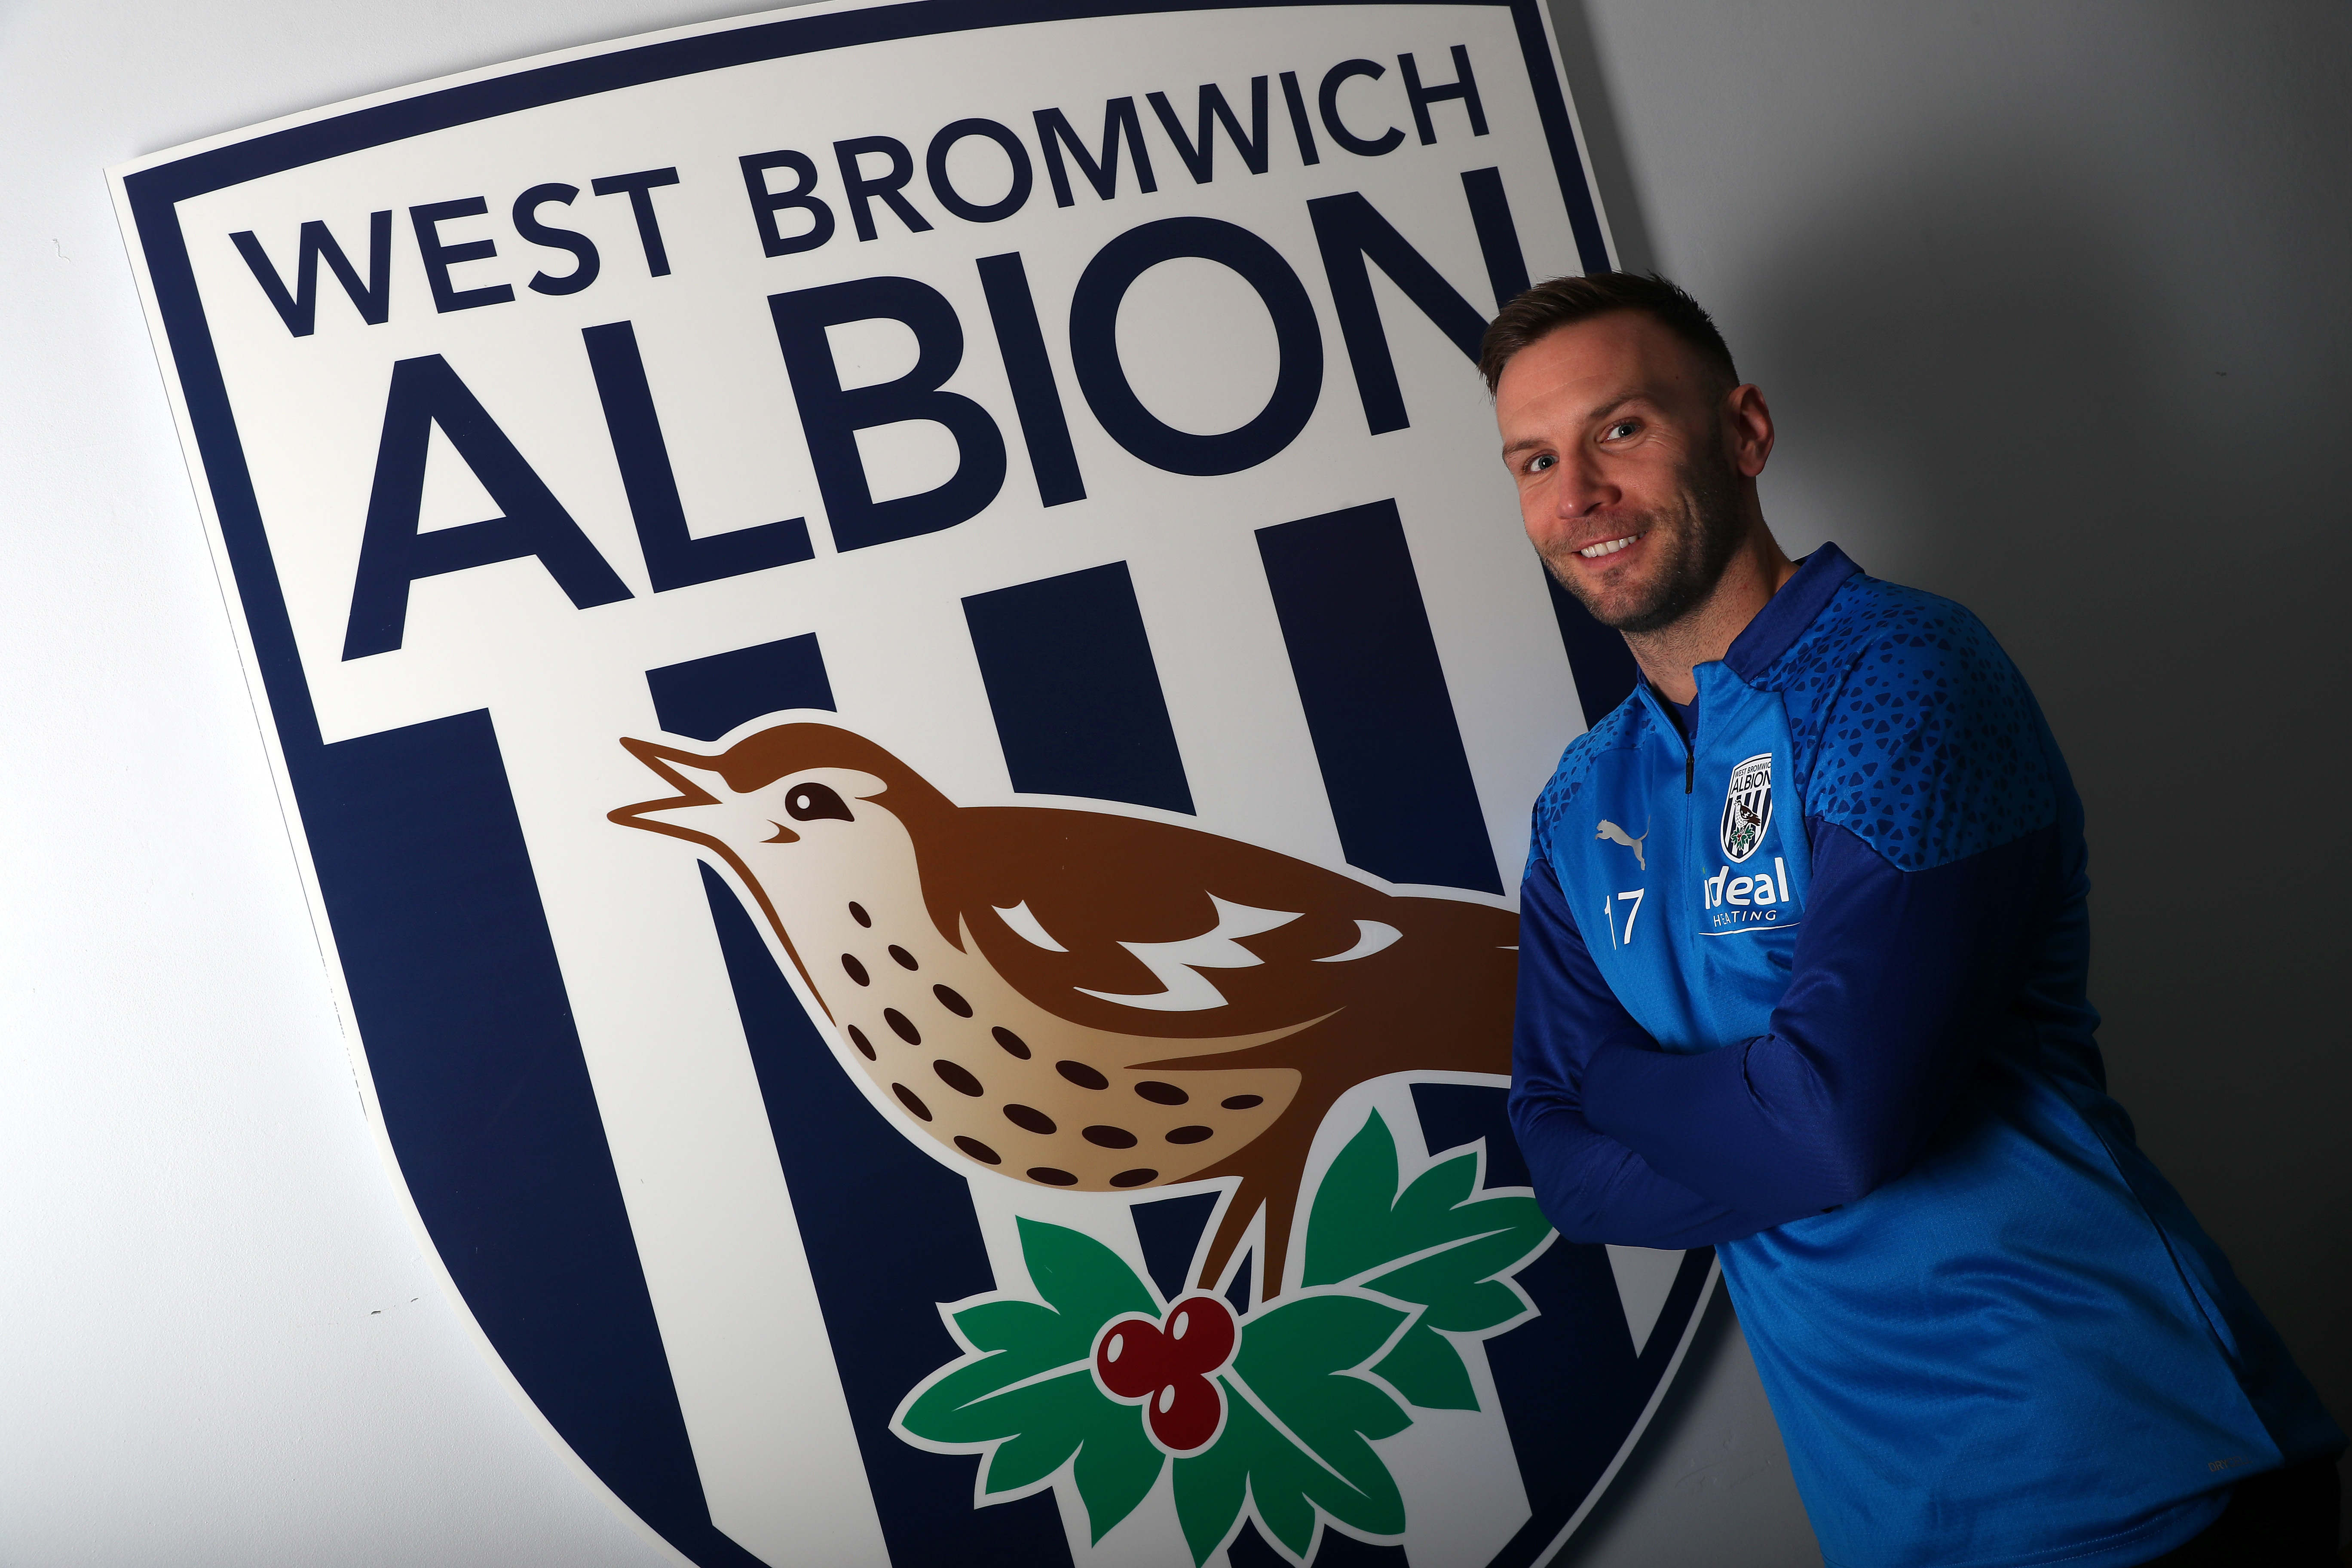 Andi Weimann posing for a photo standing next to a big WBA badge